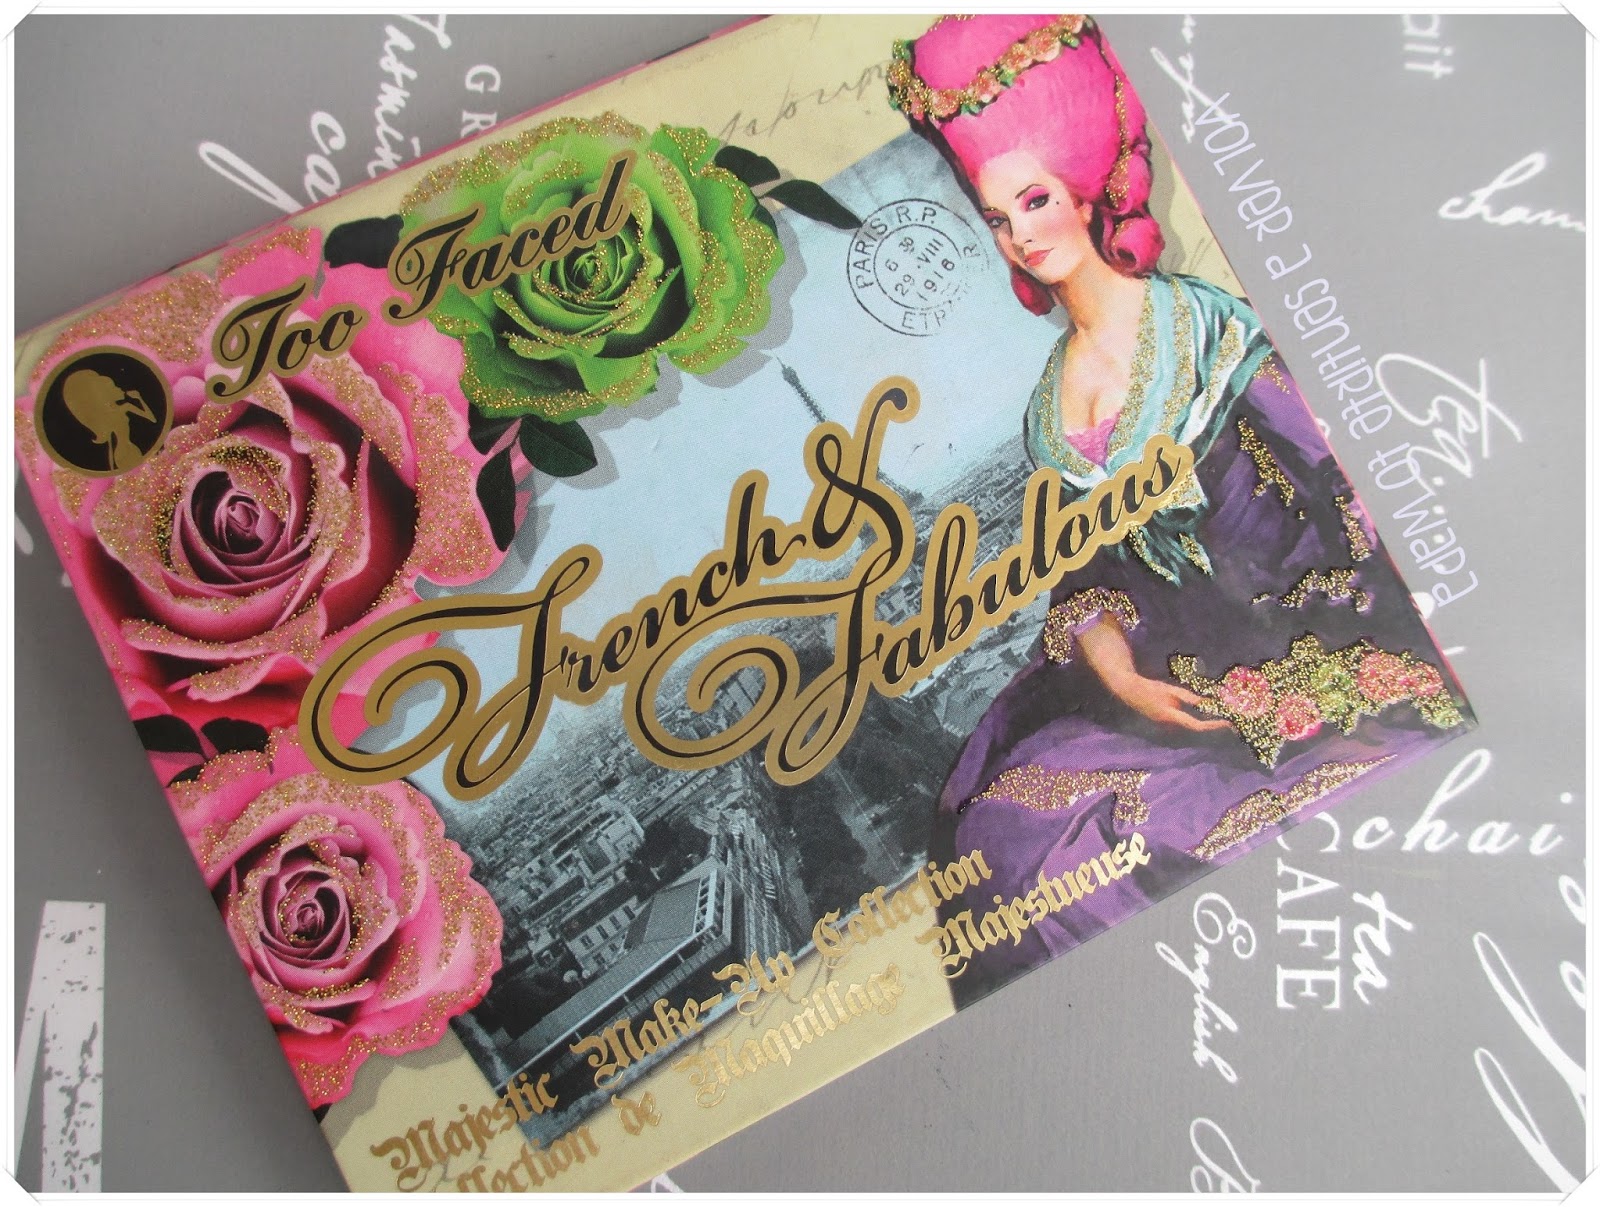 French & Fabulous de Too Faced